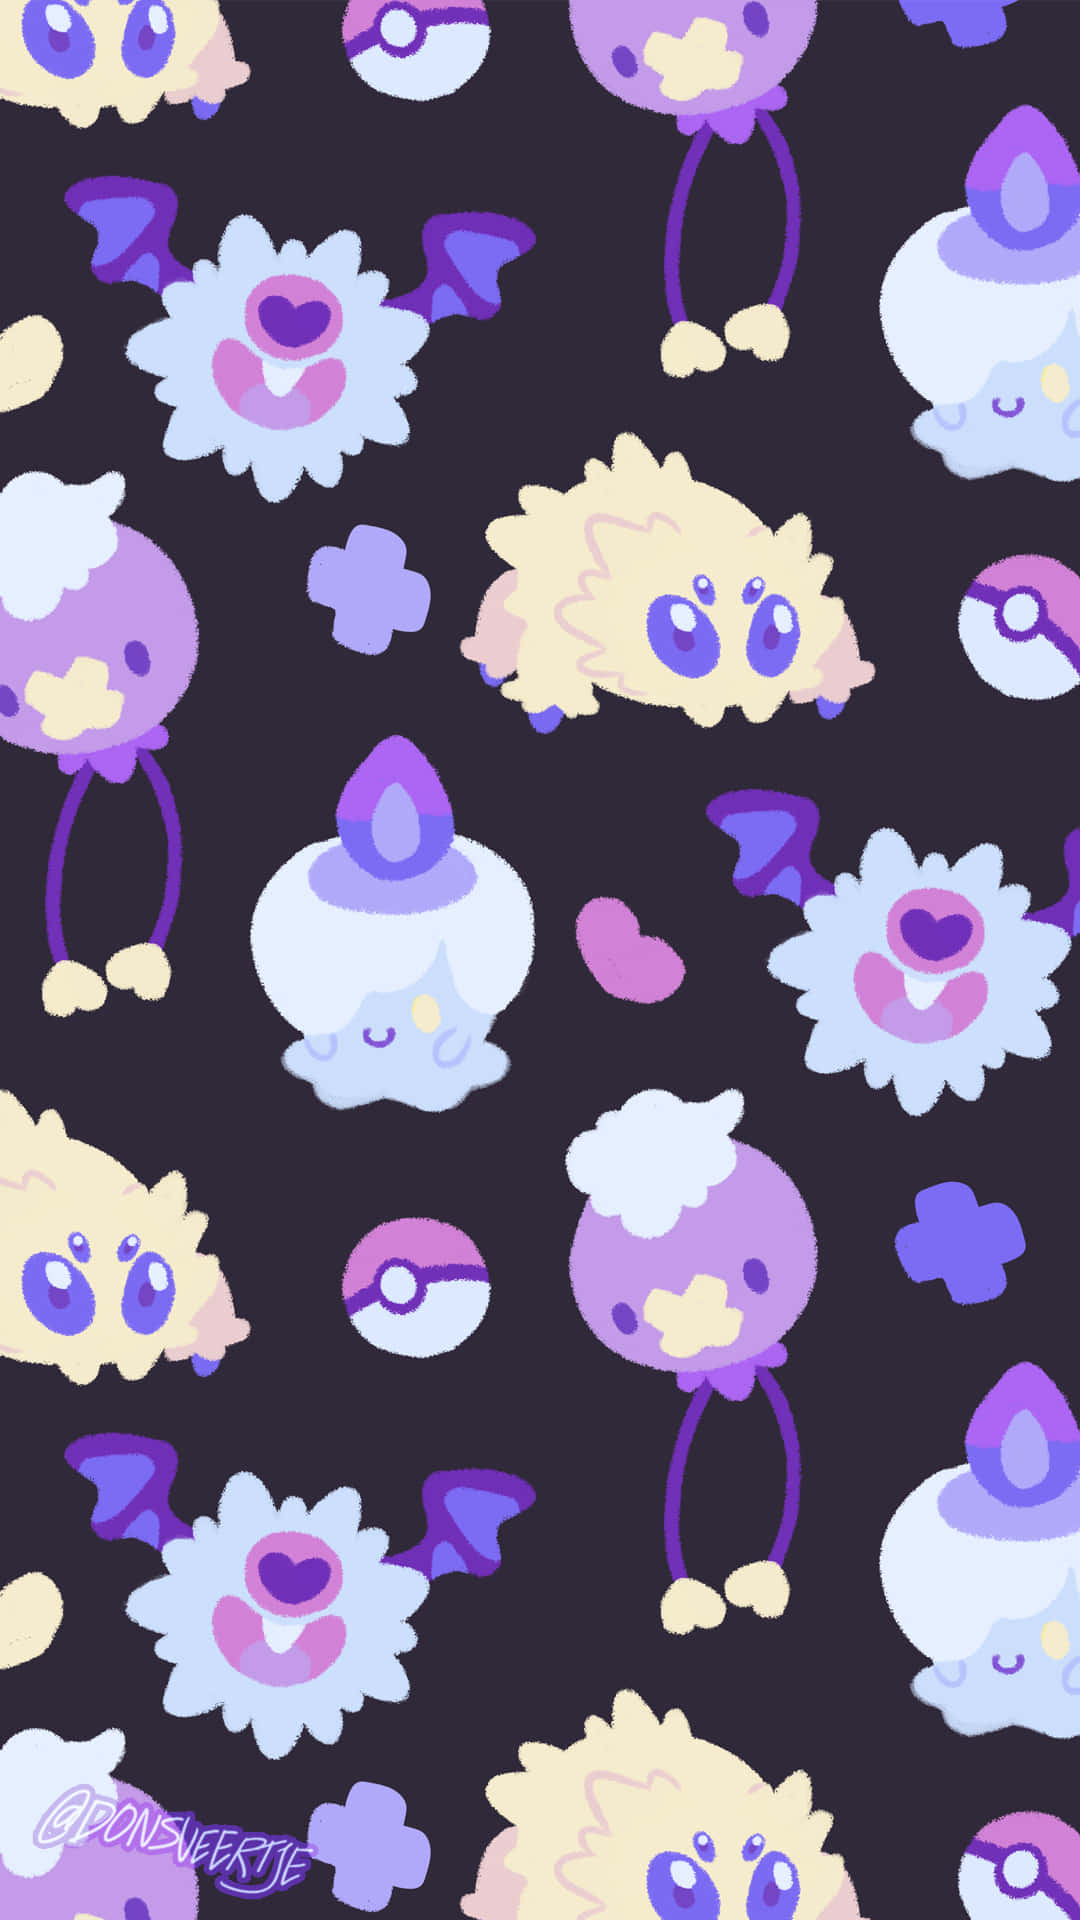 Joltik With Woobat, Litwick, And Drifloon Wallpaper